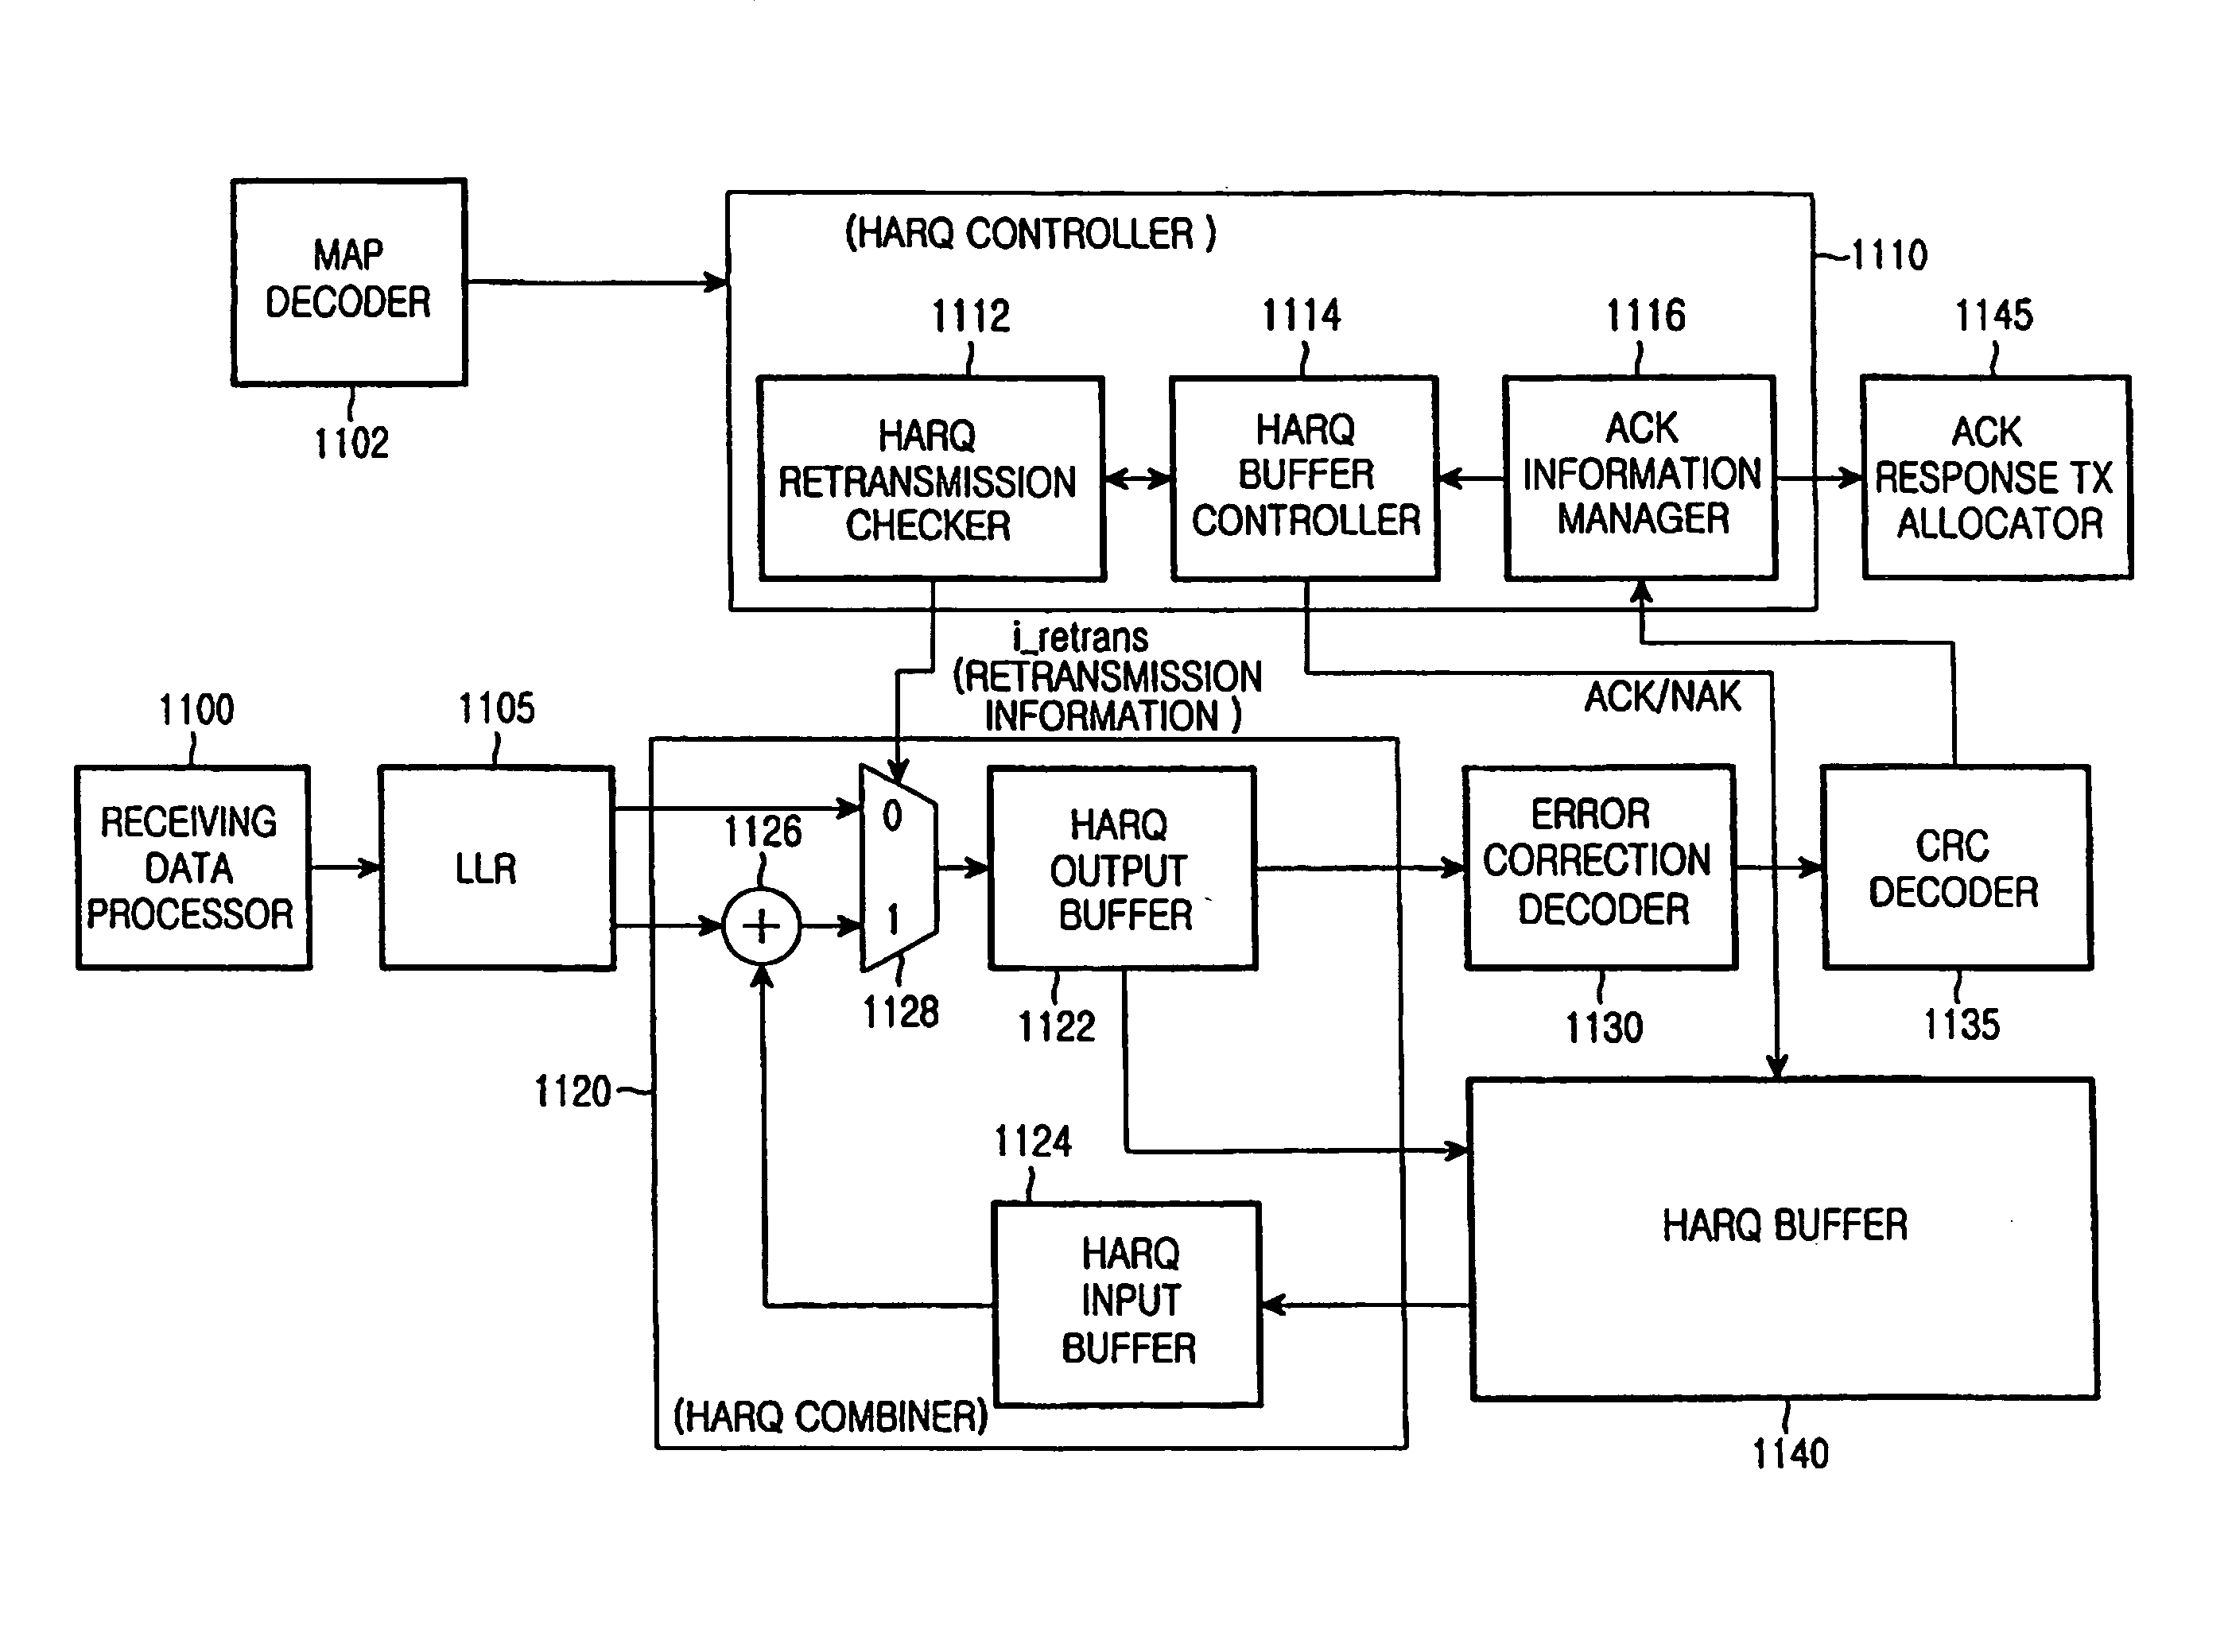 Method and apparatus for dynamically allocating HARQ buffer in wireless communication system